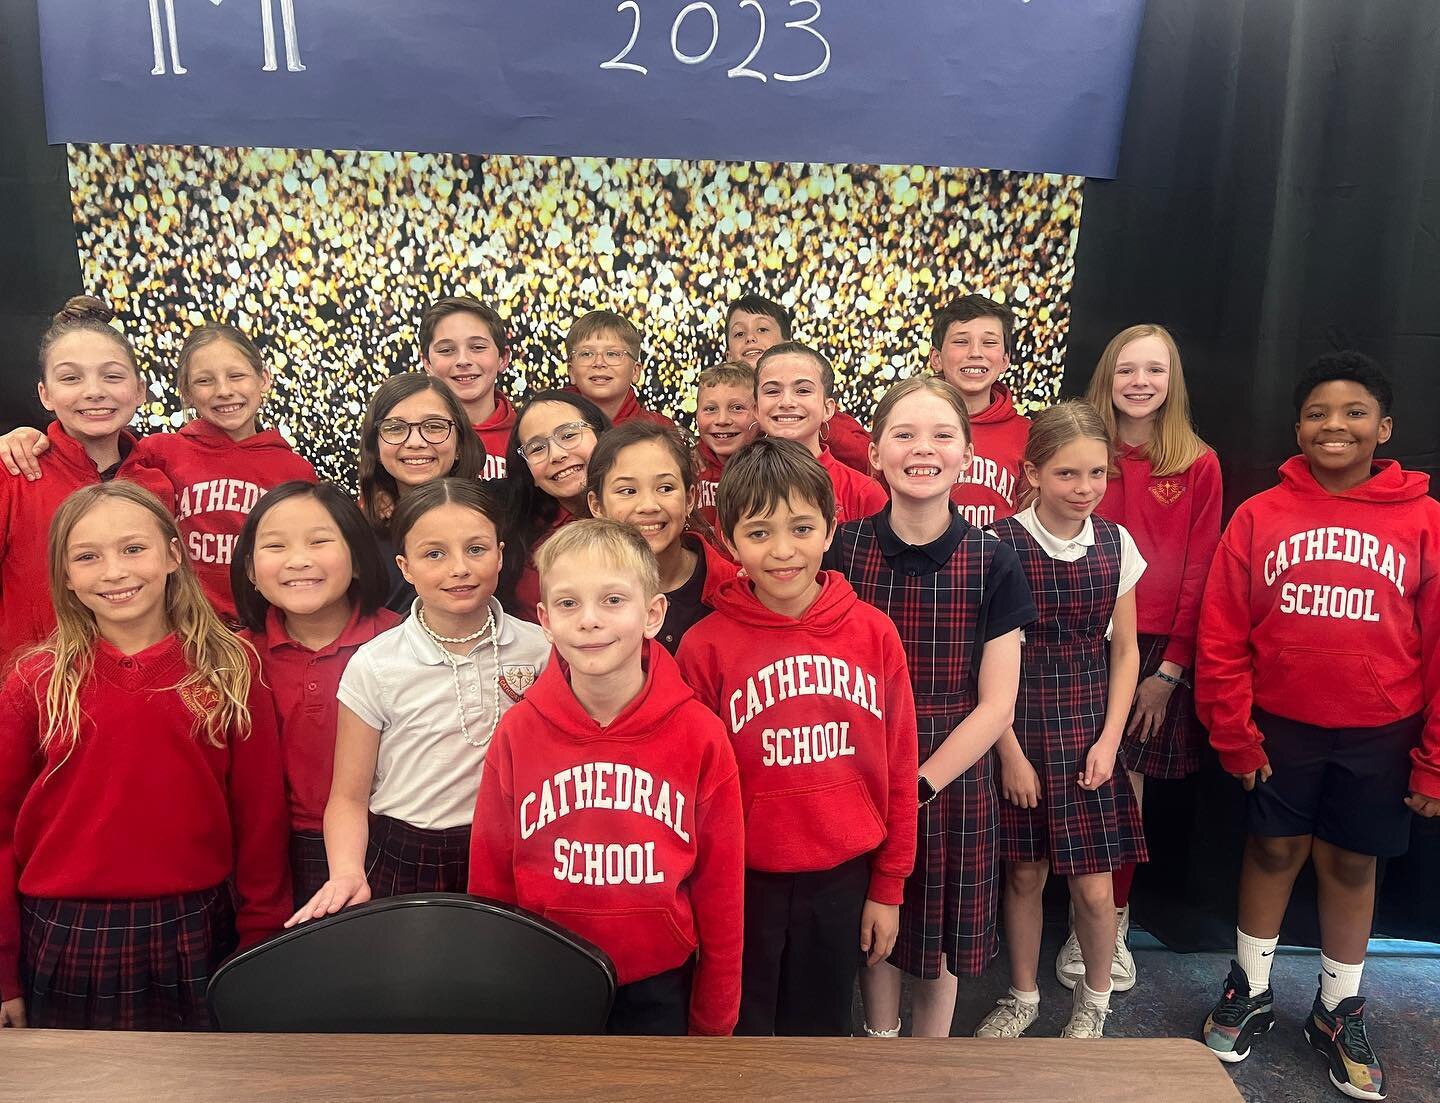 Congratulations to our 4th and 5th grade Battle of the Books teams! Students read specific titles and were asked questions about the books and competed against St. John Fisher and the Madeline. Great job Cathedral! 📚❤️

#cathedralschool #catholicsch